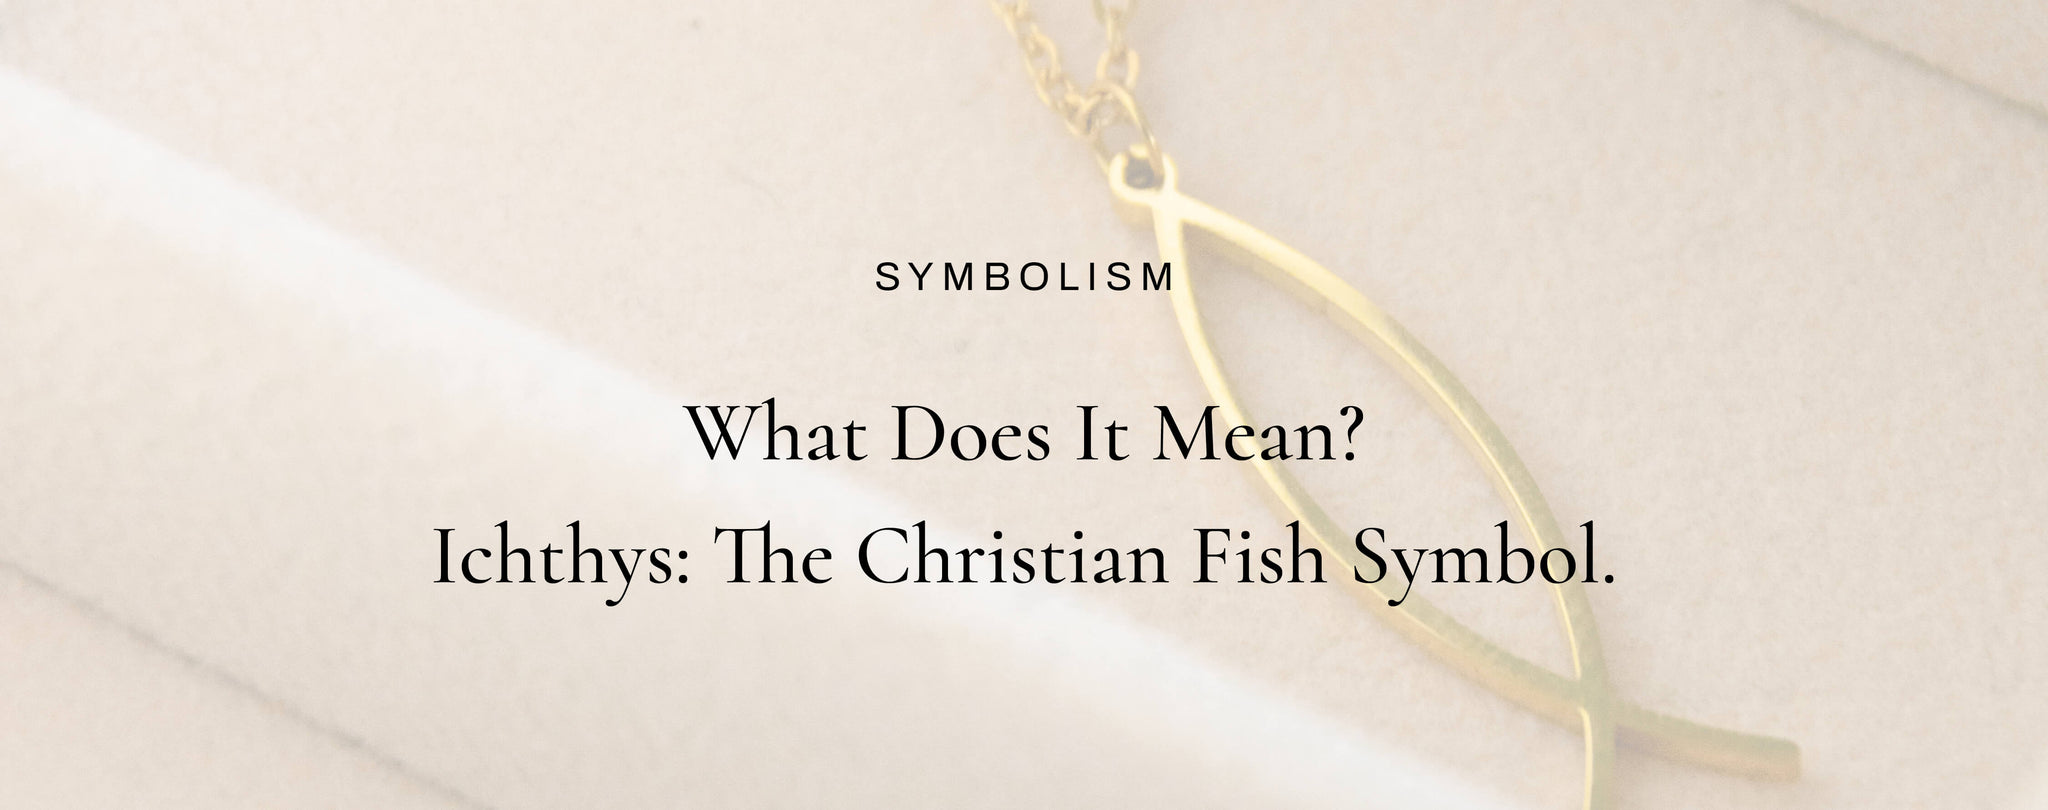 Ichthys: The Meaning of the Christian Fish Symbol